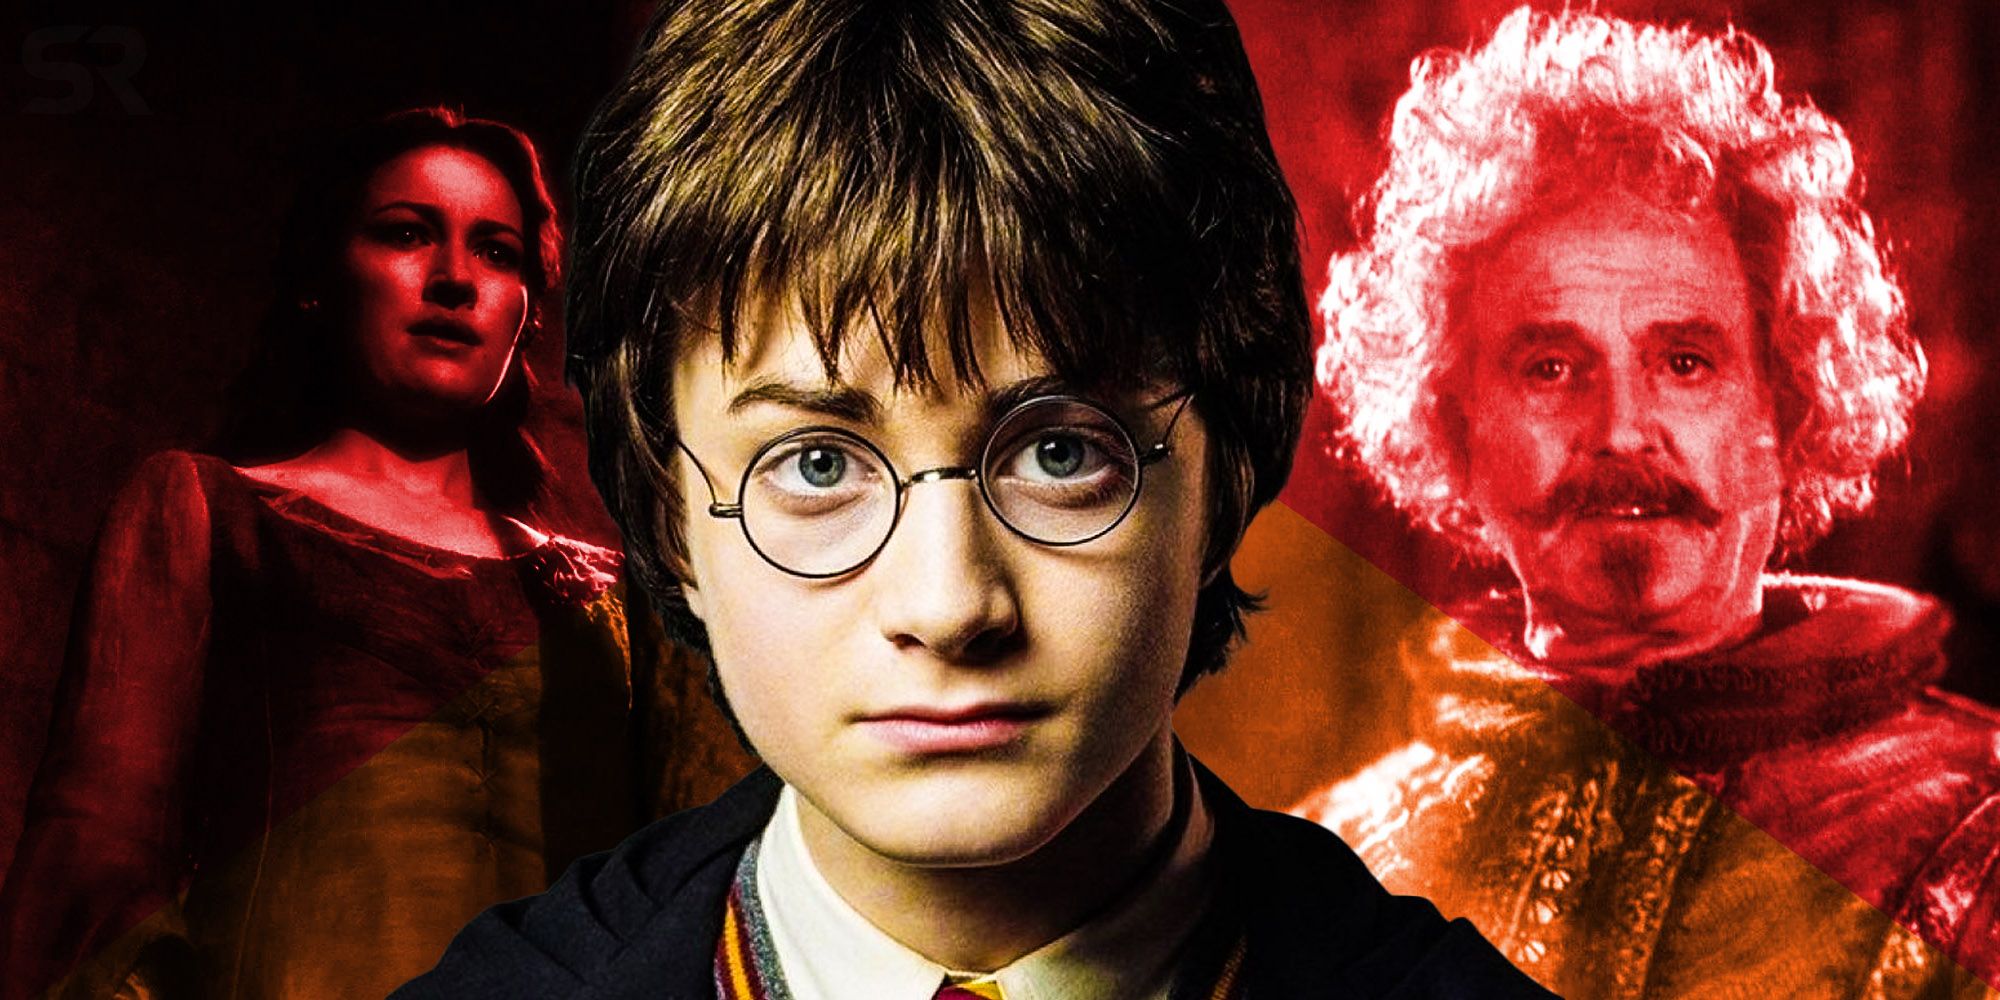 Harry Potter: Hogwarts House Ghosts’ Backstories The Movies Left Out